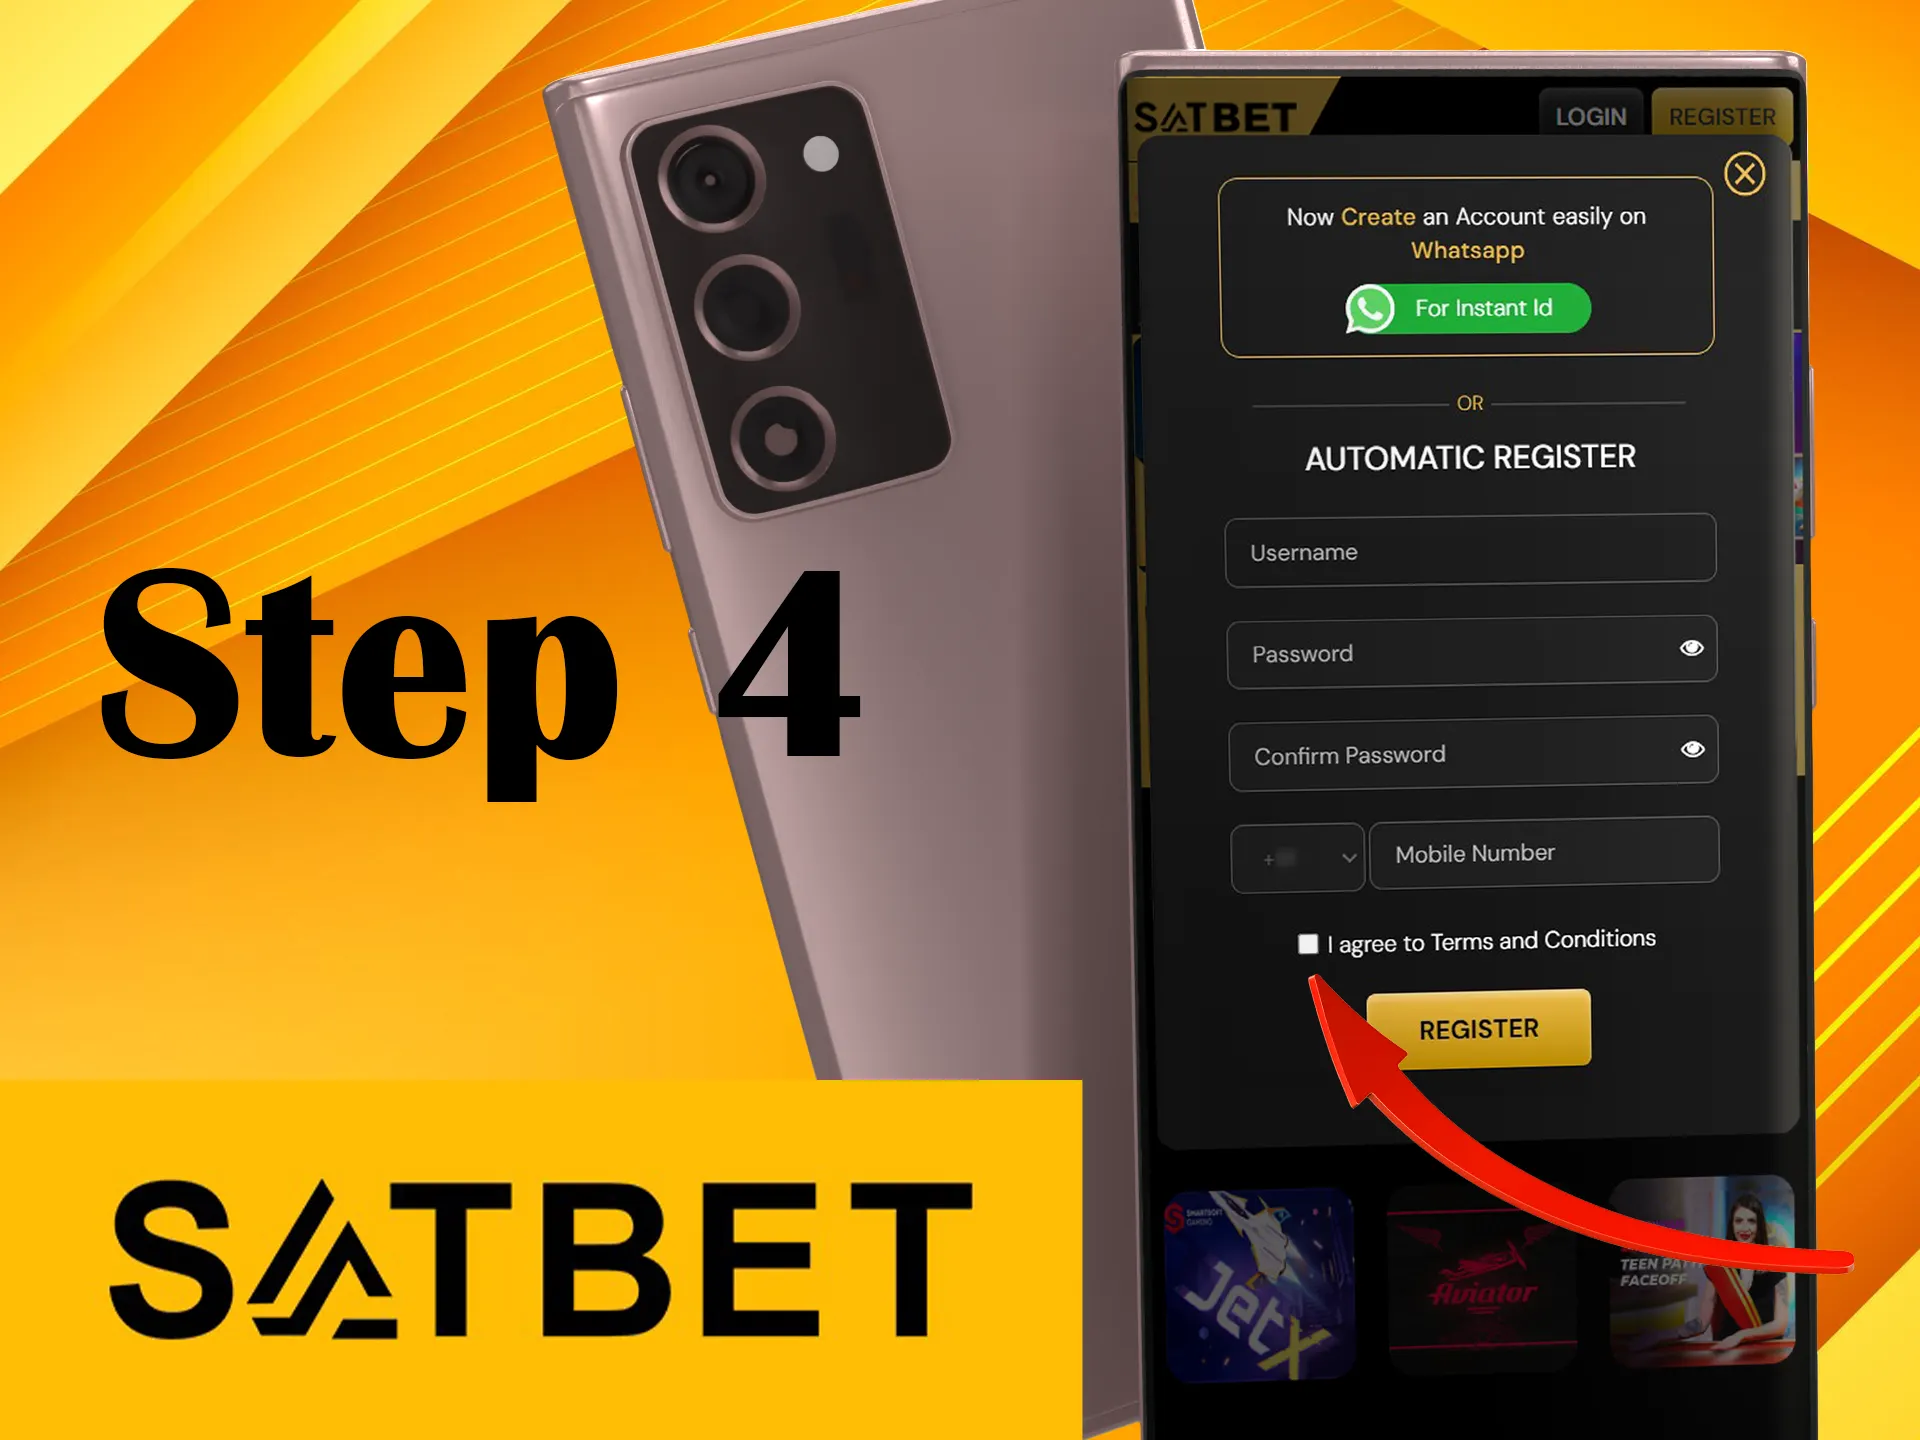 To complete your registration, agree to Satbet's Terms and Conditions.